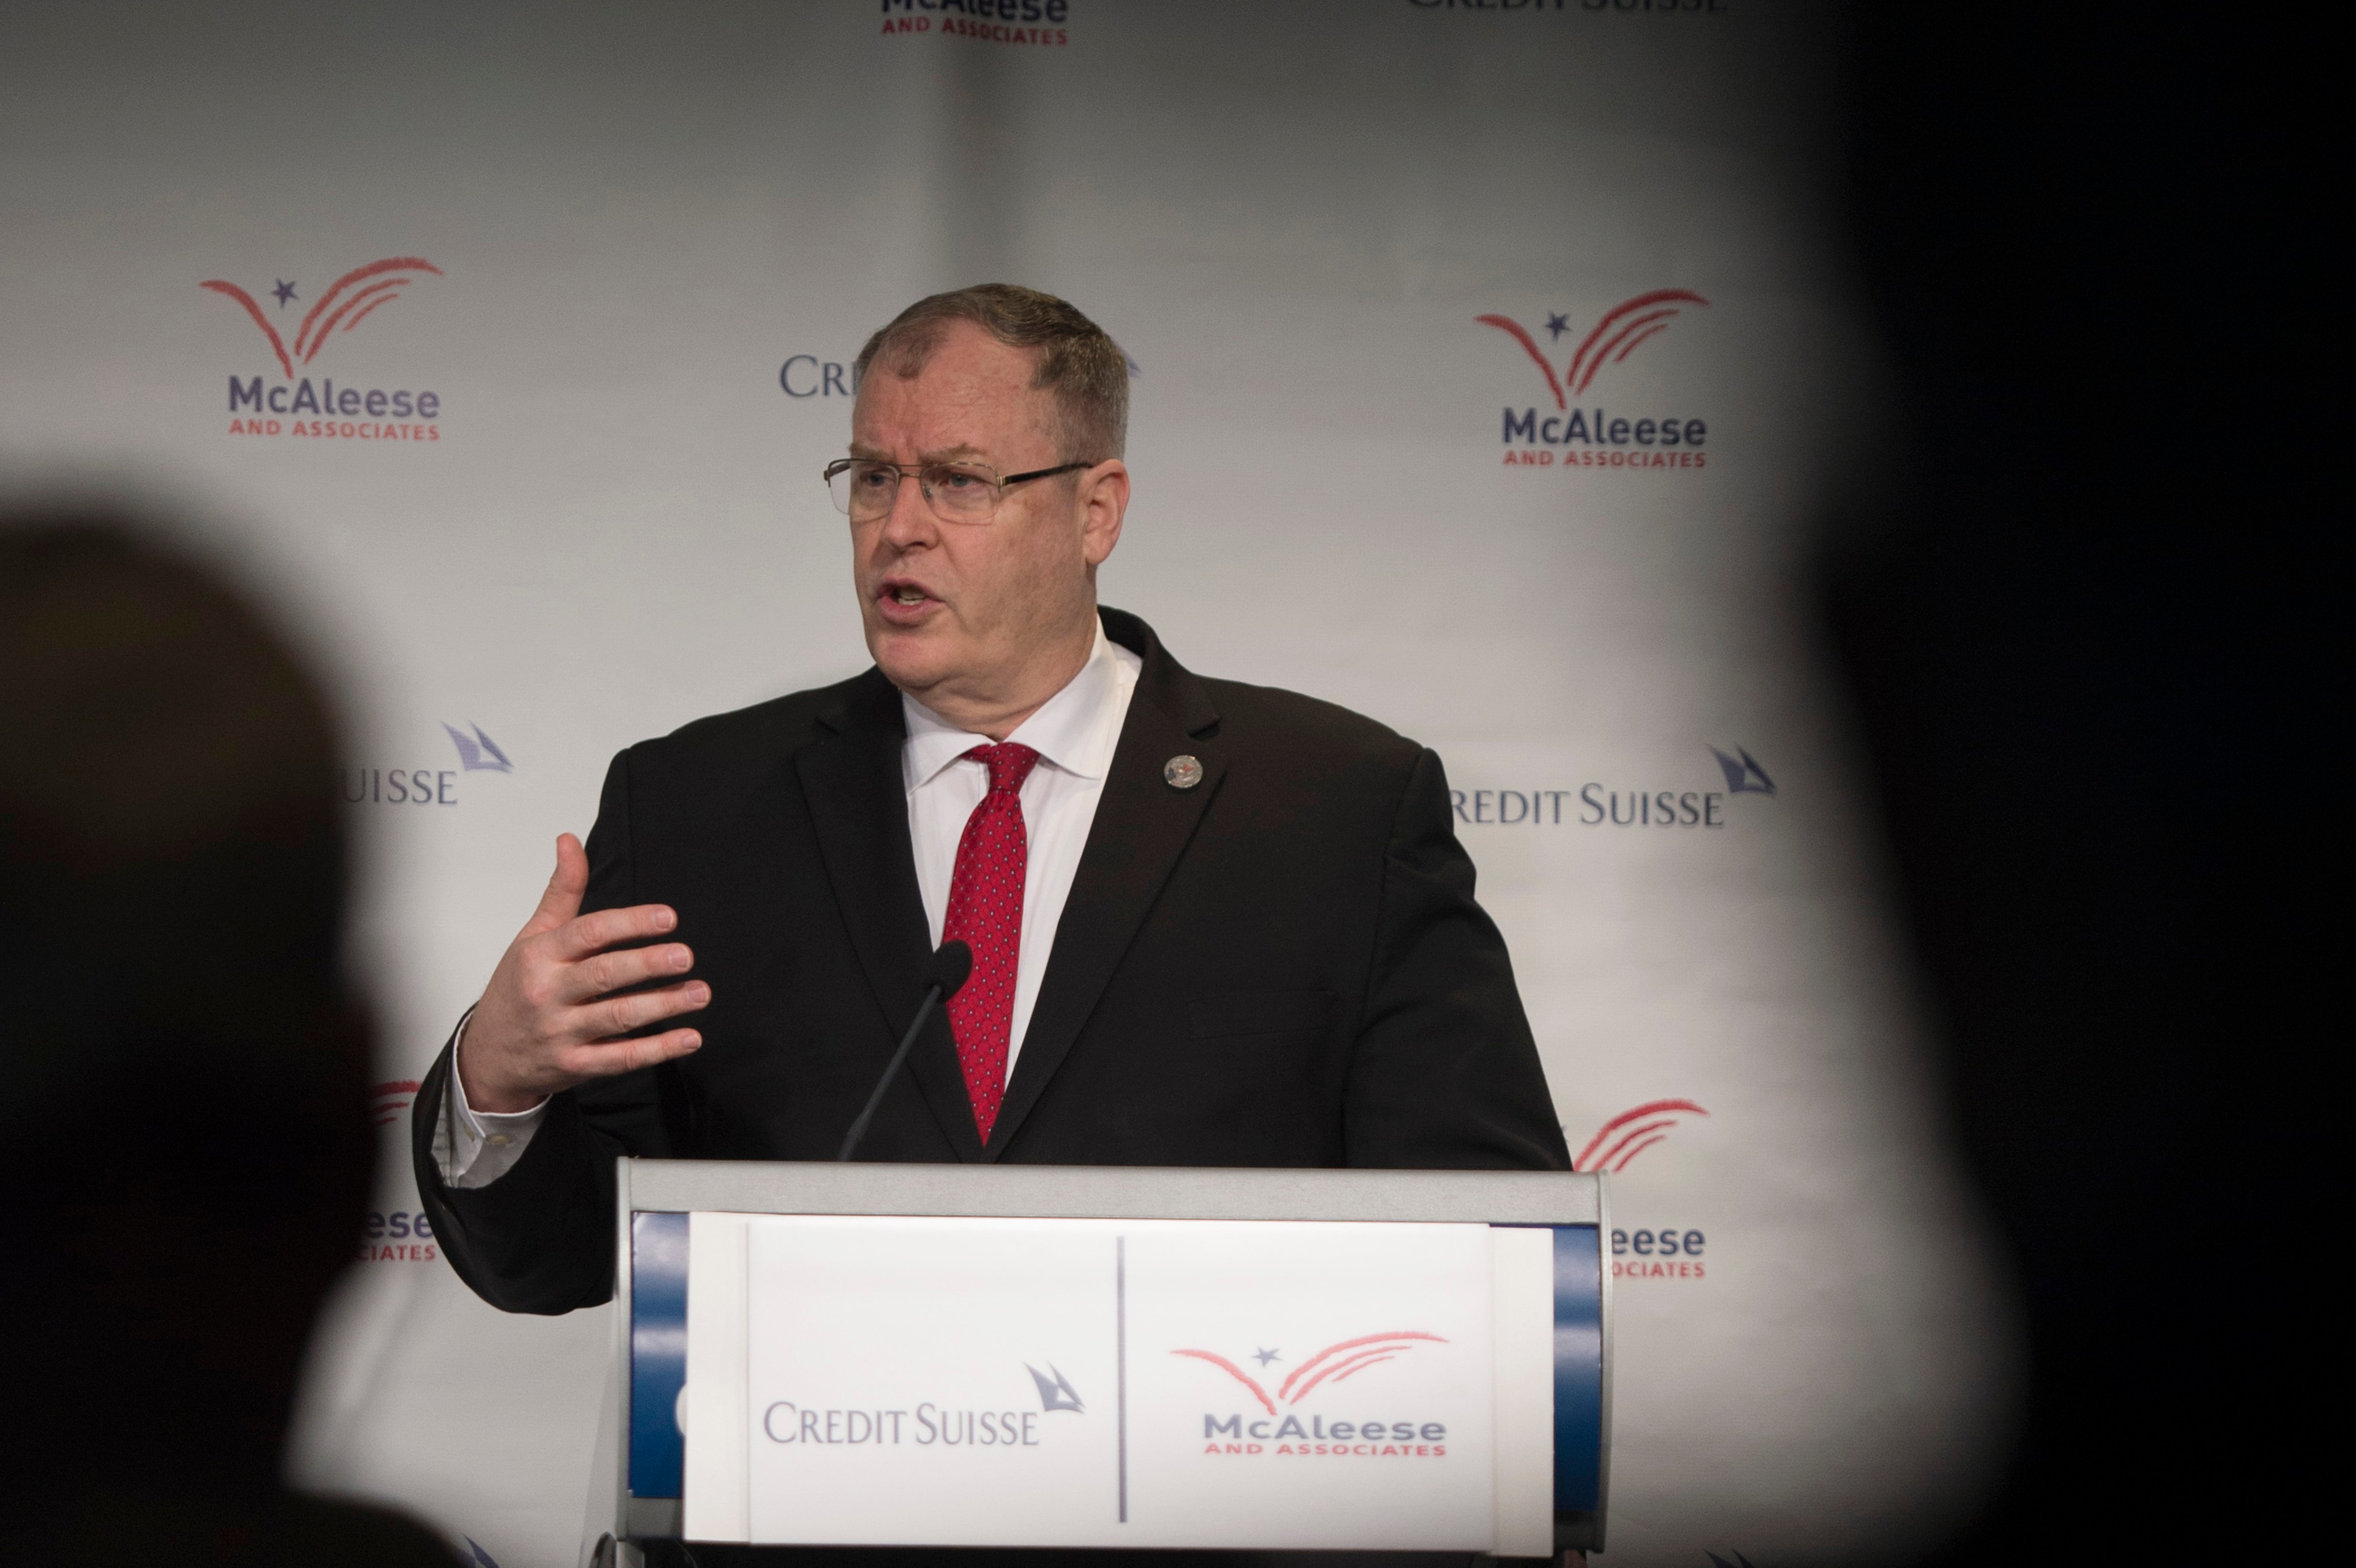 Deputy Secretary of Defense Bob Work speaks at the McAleese/Credit Suisse FY2016 Defense Programs Conference held at the Newseum in Washington D.C., March 17, 2015. DoD Photo